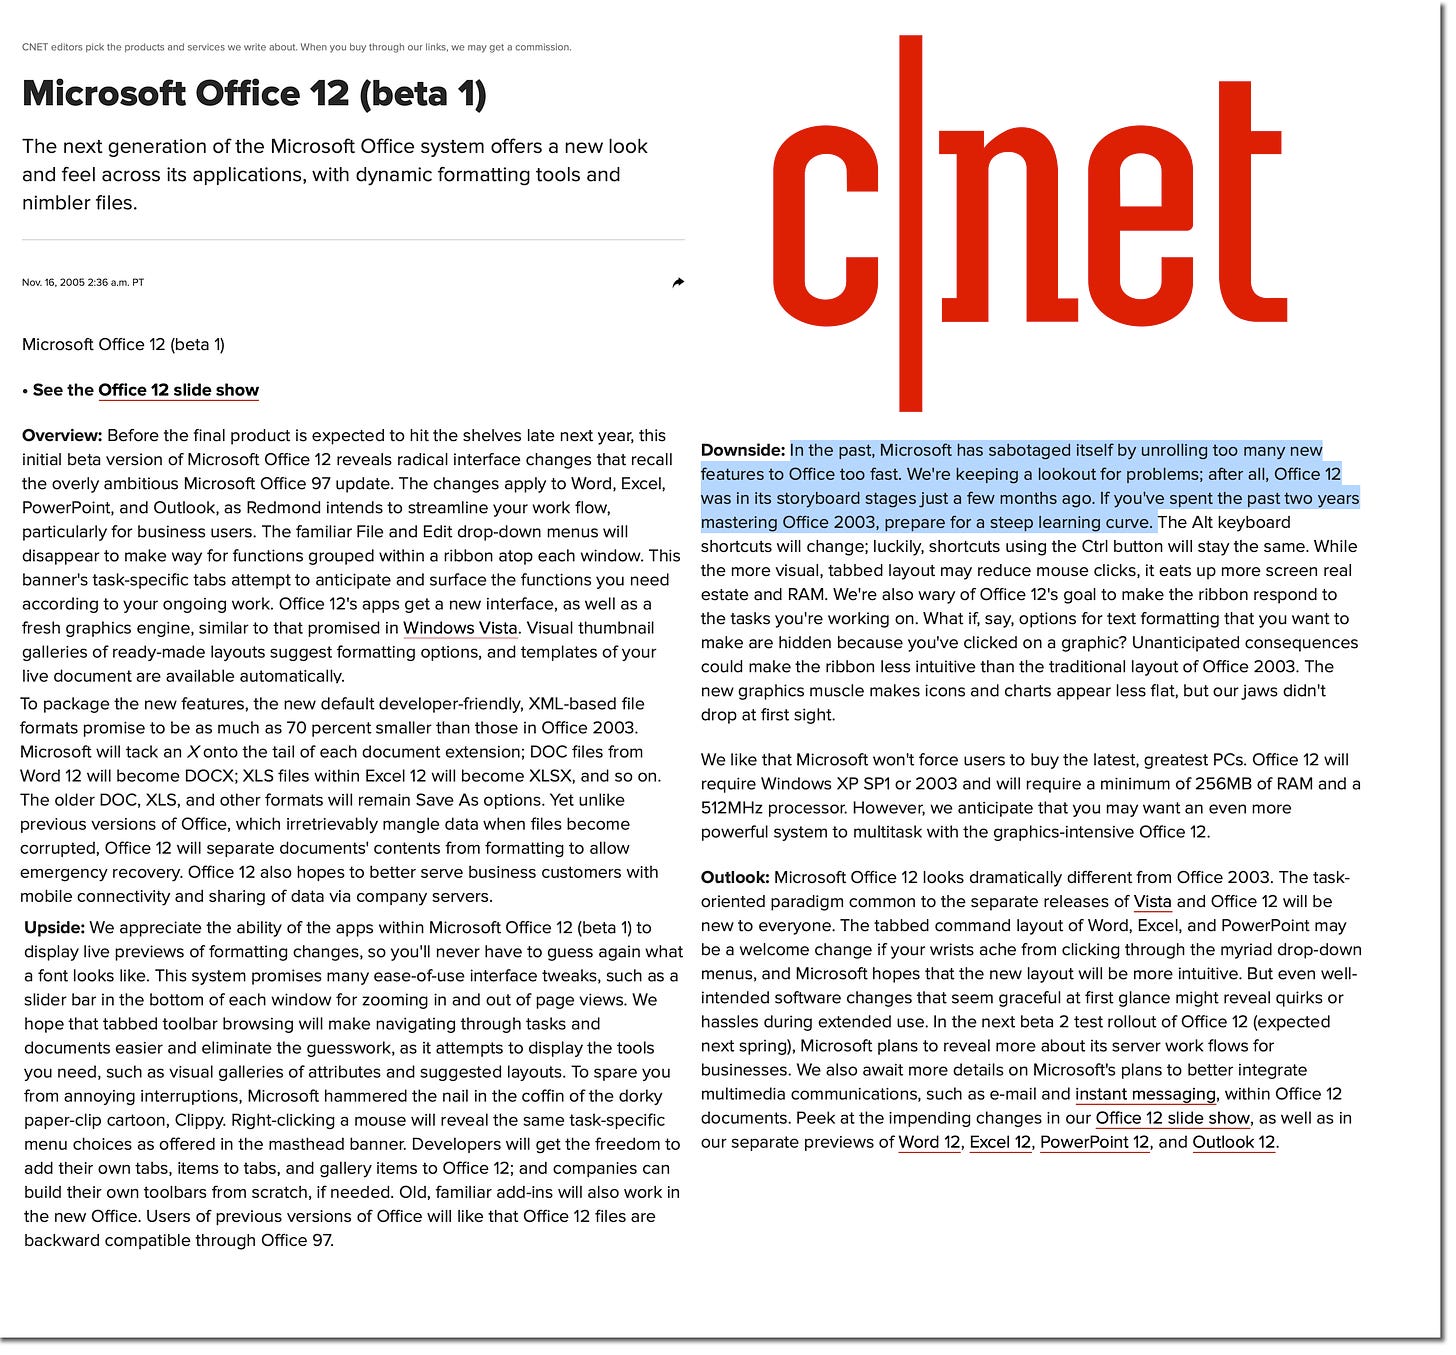 CNET editors pick the products and services we write about. When you buy through our links, we may get a commission. Microsoft Office 12 (beta 1) The next generation of the Microsoft Office system offers a new look and feel across its applications, with dynamic formatting tools and nimbler files. Nov. 16, 2005 2:36 a.m. PT cnet Microsoft Office 12 (beta 1) • See the Office 12 slide show Overview: Before the final product is expected to hit the shelves late next year, this initial beta version of Microsoft Office 12 reveals radical interface changes that recall Downside: In the past, Microsoft has sabotaged itself by unrolling too many new the overly ambitious Microsoft Office 97 update. The changes apply to Word, Excel, features to Office too fast. We're keeping a lookout for problems; after all, Office 12 PowerPoint, and Outlook, as Redmond intends to streamline your work flow, was in its storyboard stages just a few months ago. If you've spent the past two years particularly for business users. The familiar File and Edit drop-down menus will mastering Office 2003, prepare for a steep learning curve. The Alt keyboard disappear to make way for functions grouped within a ribbon atop each window. This shortcuts will change; luckily, shortcuts using the Ctrl button will stay the same. While the more visual, tabbed layout may reduce mouse clicks, it eats up more screen real banner's task-specific tabs attempt to anticipate and surface the functions you need according to your ongoing work. Office 12's apps get a new interface, as well as a estate and RAM. We're also wary of Office 12's goal to make the ribbon respond to the tasks you're working on. What if, say, options for text formatting that you want to fresh graphics engine, similar to that promised in Windows Vista. Visual thumbnail make are hidden because you've clicked on a graphic? Unanticipated consequences galleries of ready-made layouts suggest formatting options, and templates of your could make the ribbon less intuitive than the traditional layout of Office 2003. The live document are available automatically. new graphics muscle makes icons and charts appear less flat, but our jaws didn't To package the new features, the new default developer-friendly, XML-based file drop at first sight. formats promise to be as much as 70 percent smaller than those in Office 2003. Microsoft will tack an X onto the tail of each document extension; DOC files from Word 12 will become DOCX; XLS files within Excel 12 will become XLSX, and so on. The older DOC, XLS, and other formats will remain Save As options. Yet unlike previous versions of Office, which irretrievably mangle data when files become We like that Microsoft won't force users to buy the latest, greatest PCs. Office 12 will require Windows XP SP1 or 2003 and will require a minimum of 256MB of RAM and a 512MHz processor. However, we anticipate that you may want an even more powerful system to multitask with the graphics-intensive Office 12. corrupted, Office 12 will separate documents' contents from formatting to allow emergency recovery. Office 12 also hopes to better serve business customers with mobile connectivity and sharing of data via company servers. Outlook: Microsoft Office 12 looks dramatically different from Office 2003. The task- oriented paradigm common to the separate releases of Vista and Office 12 will be Upside: We appreciate the ability of the apps within Microsoft Office 12 (beta 1) to new to everyone. The tabbed command layout of Word, Excel, and PowerPoint may display live previews of formatting changes, so you'll never have to guess again what be a welcome change if your wrists ache from clicking through the myriad drop-down a font looks like. This system promises many ease-of-use interface tweaks, such as a menus, and Microsoft hopes that the new layout will be more intuitive. But even well- slider bar in the bottom of each window for zooming in and out of page views. We intended software changes that seem graceful at first glance might reveal quirks or hope that tabbed toolbar browsing will make navigating through tasks and hassles during extended use. In the next beta 2 test rollout of Office 12 (expected documents easier and eliminate the guesswork, as it attempts to display the tools next spring), Microsoft plans to reveal more about its server work flows for you need, such as visual galleries of attributes and suggested layouts. To spare you businesses. We also await more details on Microsoft's plans to better integrate from annoying interruptions, Microsoft hammered the nail in the coffin of the dorky multimedia communications, such as e-mail and instant messaging, within Office 12 paper-clip cartoon, Clippy. Right-clicking a mouse will reveal the same task-specific documents. Peek at the impending changes in our Office 12 slide show, as well as in menu choices as offered in the masthead banner. Developers will get the freedom to our separate previews of Word 12, Excel 12, PowerPoint 12, and Outlook 12 add their own tabs, items to tabs, and gallery items to Office 12; and companies can build their own toolbars from scratch, if needed. Old, familiar add-ins will also work in the new Office. Users of previous versions of Office will like that Office 12 files are backward compatible through Office 97.